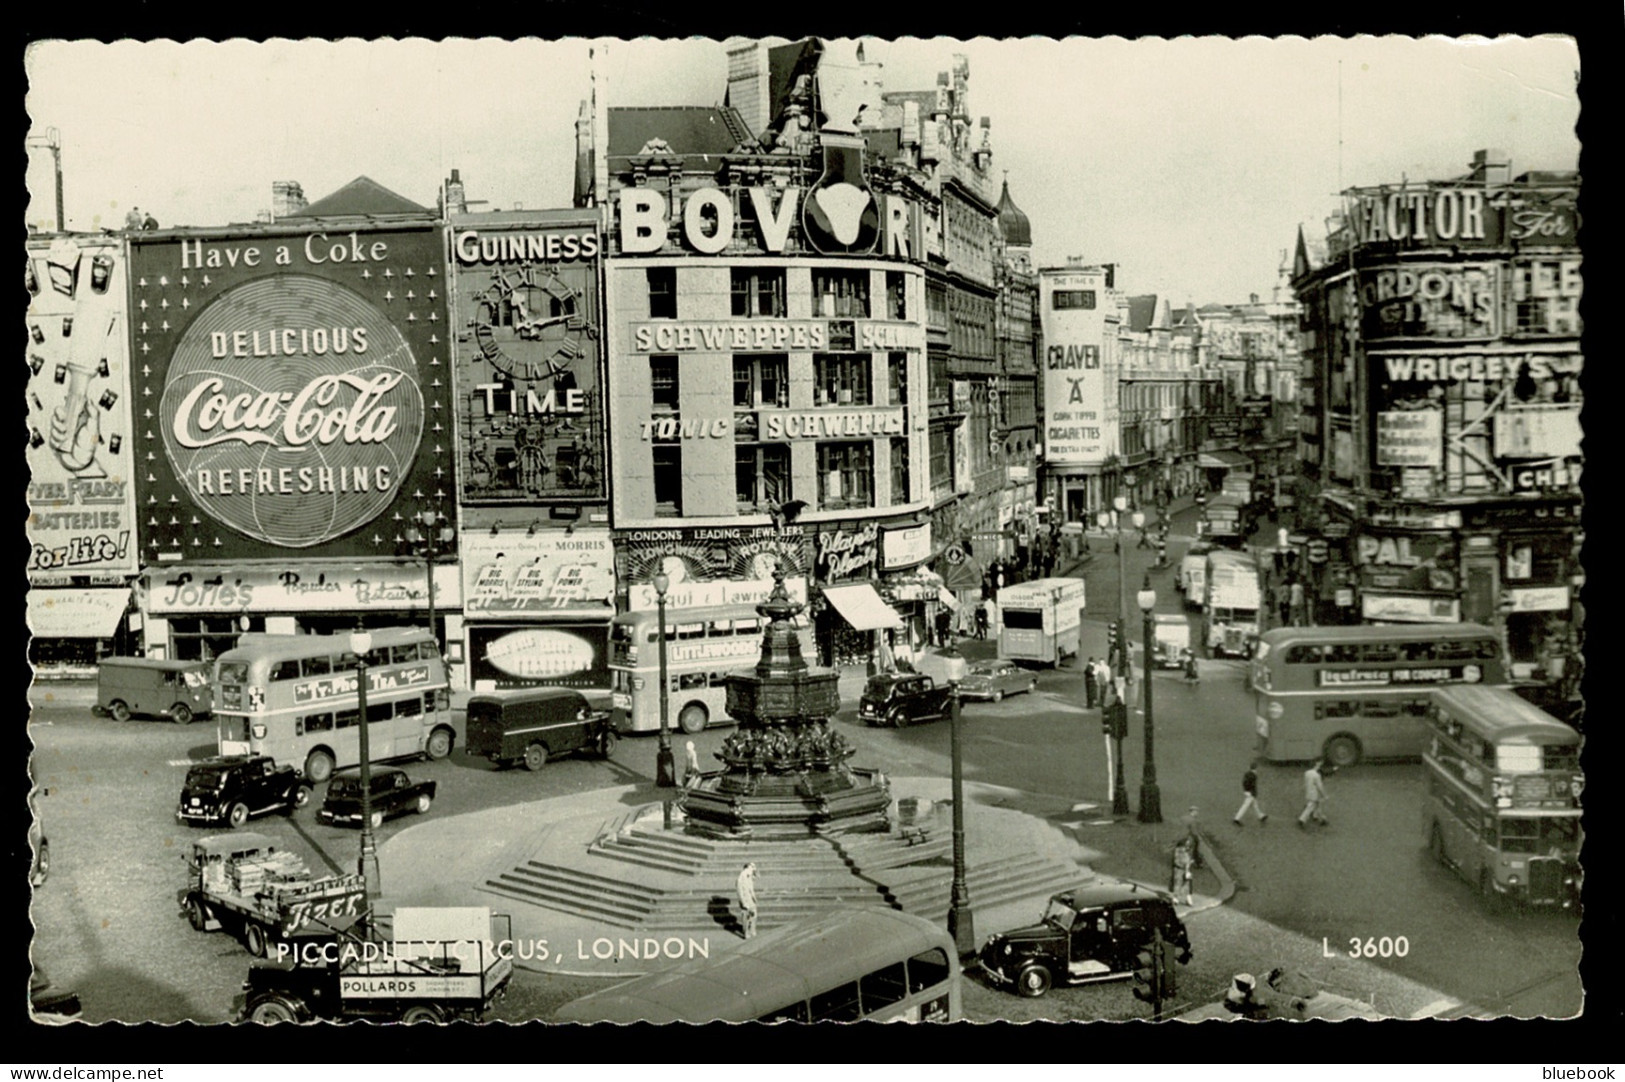 Ref 1621 - RP Animated Postcard - Piccadilly Circus - Coca-Cola Bovril Guinness Craven A & Wrigley's Adverts - Piccadilly Circus